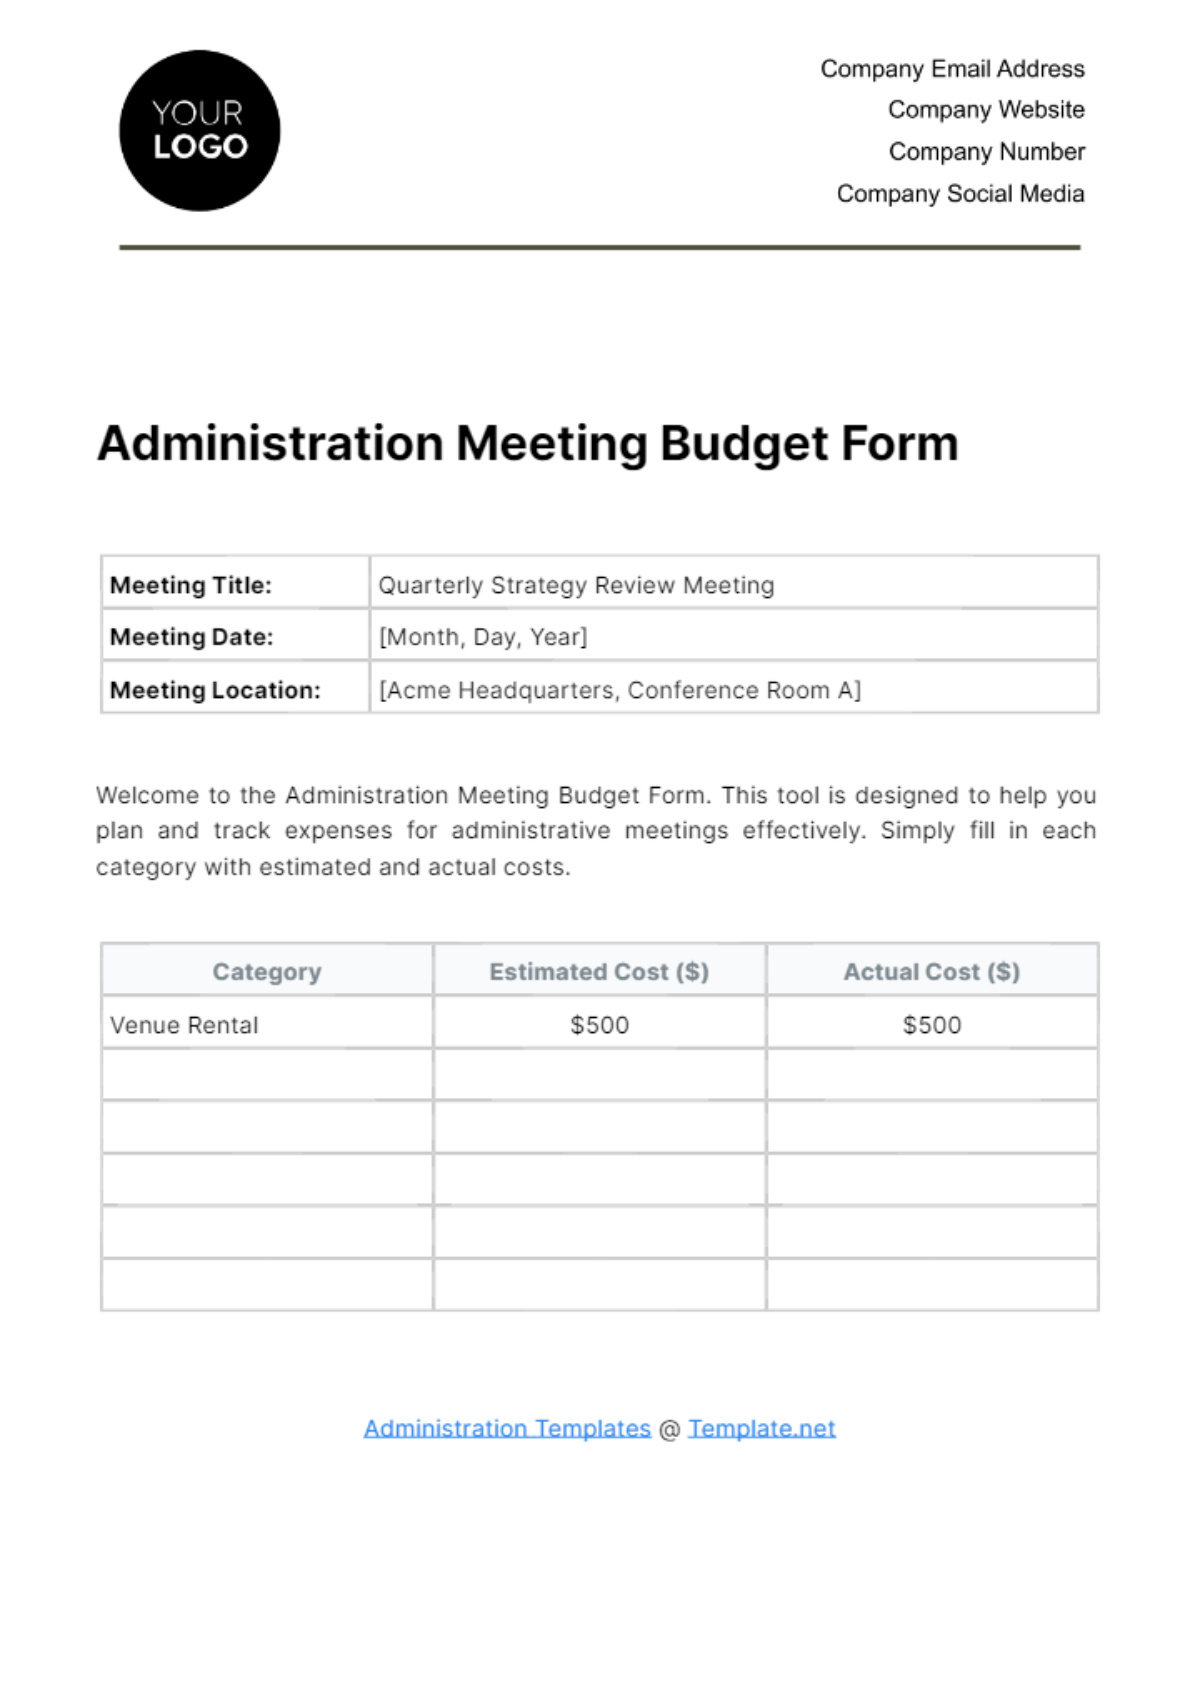 Free Administration Meeting Budget Form Template